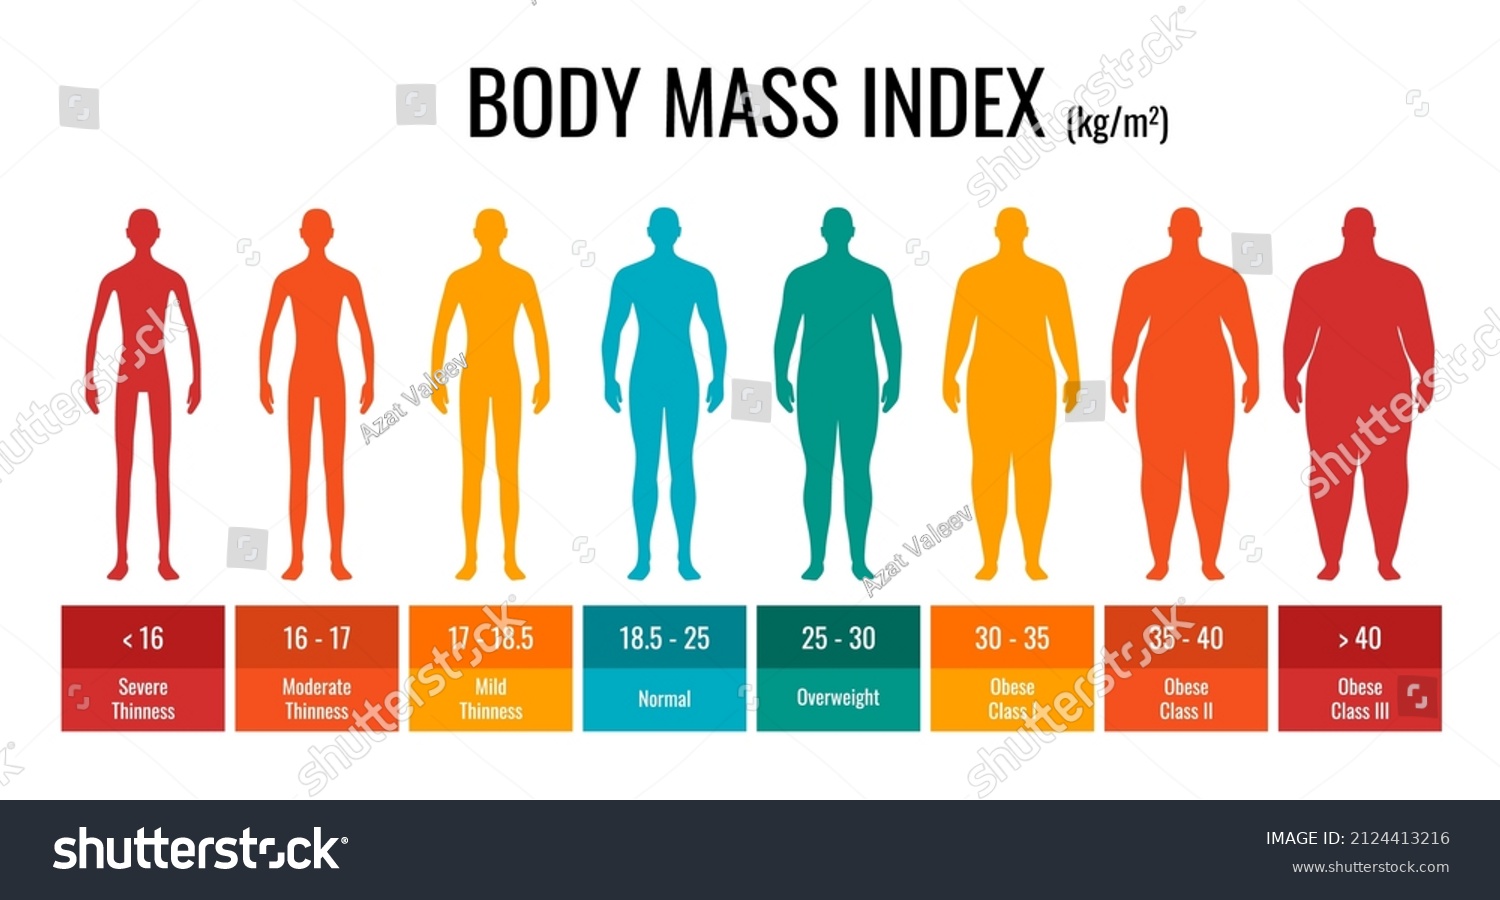 SVG of BMI classification chart measurement man set. Male Body Mass Index infographic with weight status from underweight to severely obese. Medical body mass control graph. Vector eps illustration svg